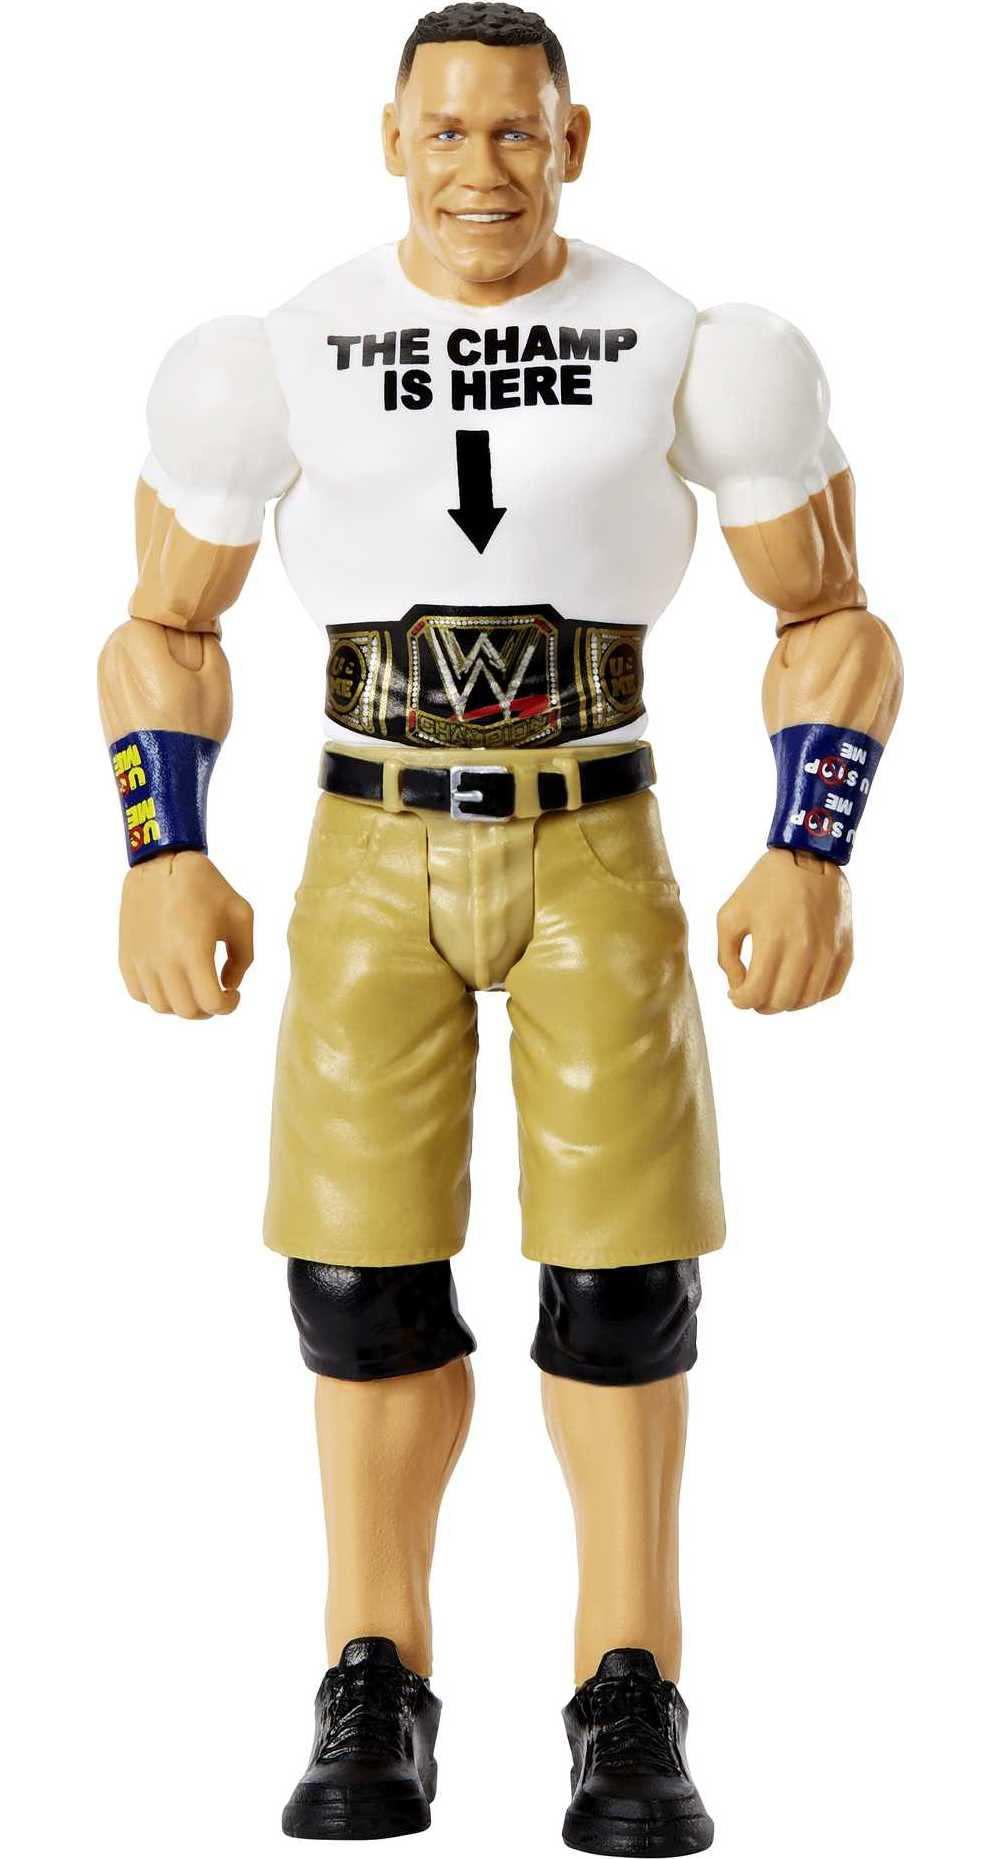 WWE mattel wwe john cena basic action figure, posable 6-inch collectible for ages 6 years old & up